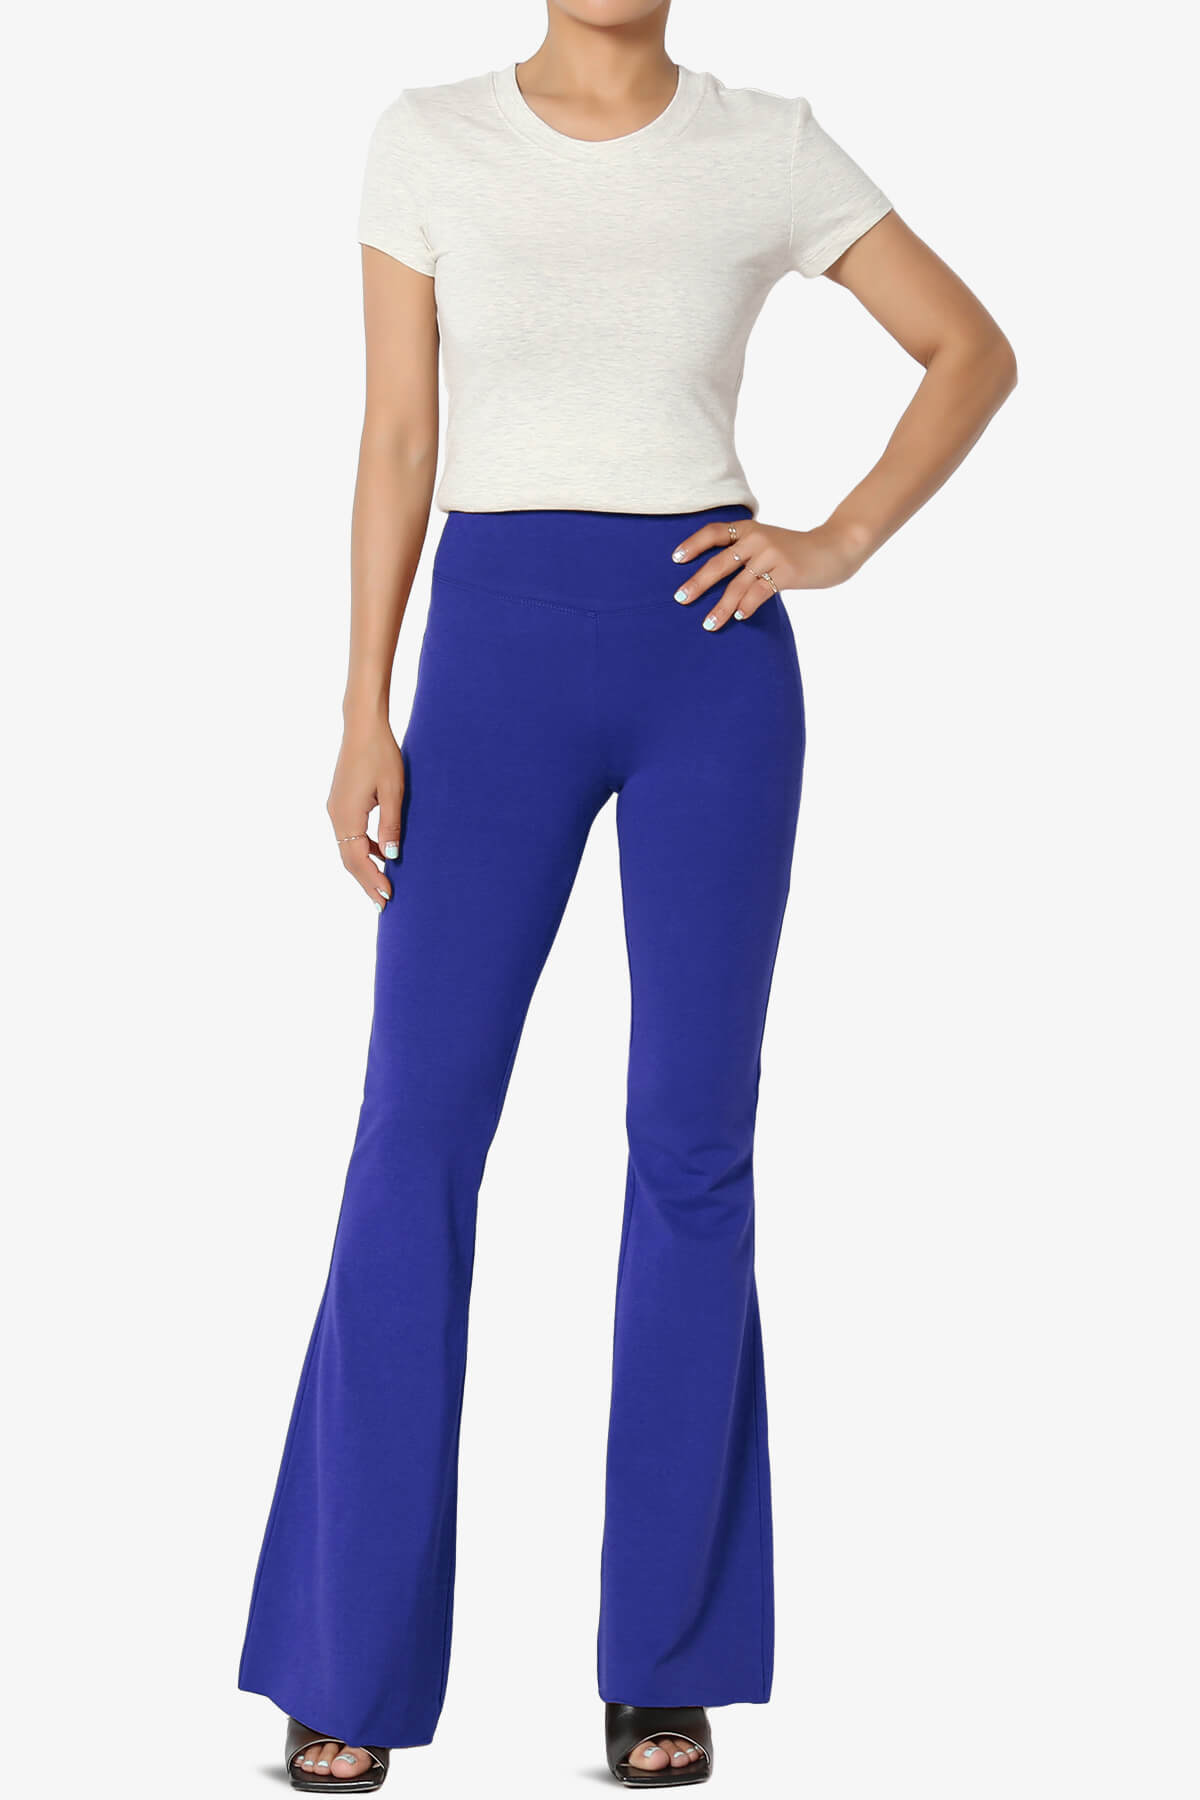 Load image into Gallery viewer, Zaylee Raw Hem Flared Comfy Yoga Pants BRIGHT BLUE_6
